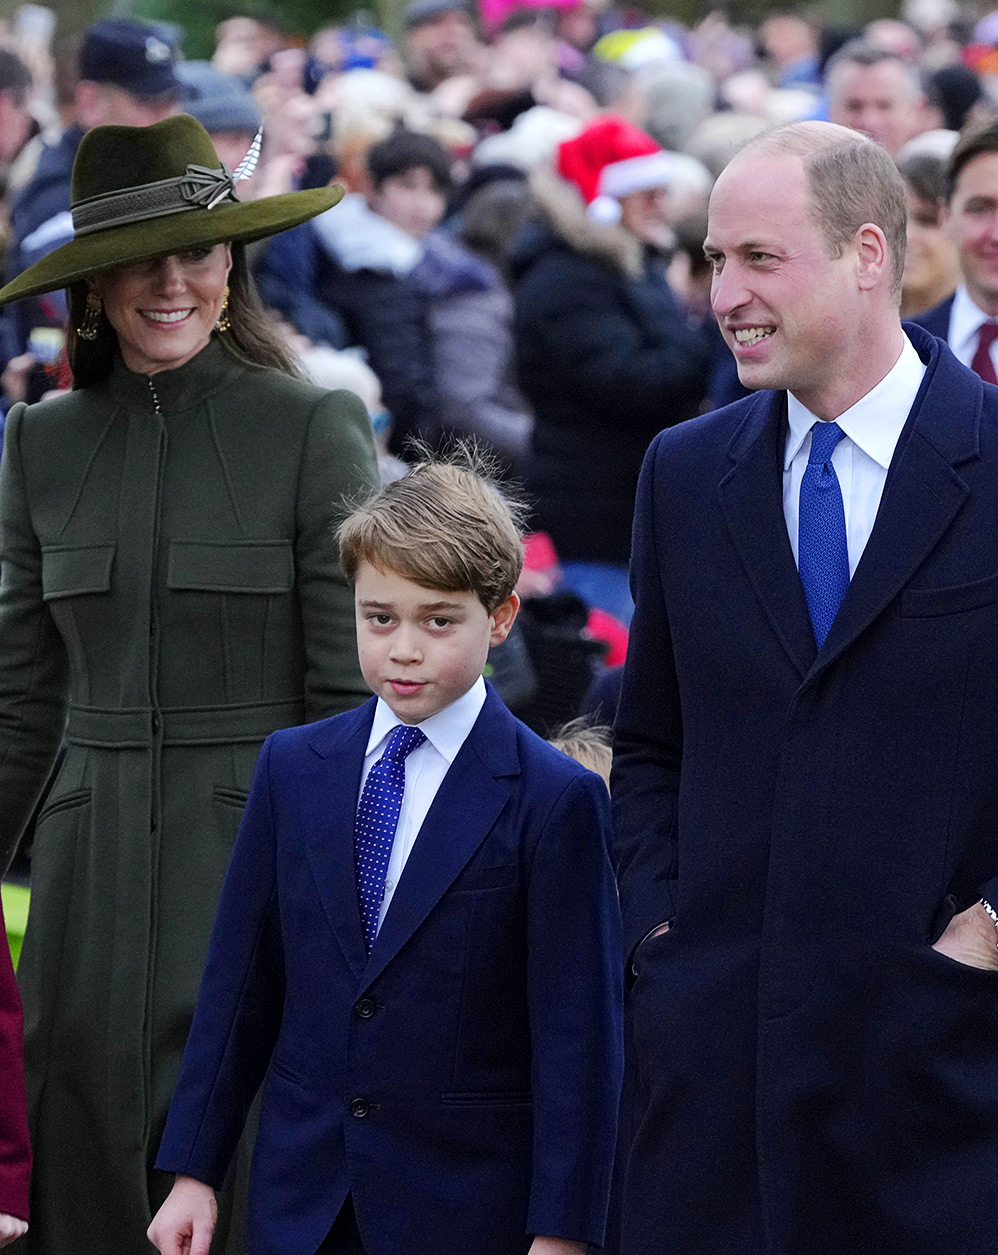 Prince William and Princess Kate Share Son Prince George's Holiday Painting of a Reindeer- See the Portrait - 214 Royals Christmas, Sandringham, United Kingdom - 25 Dec 2022